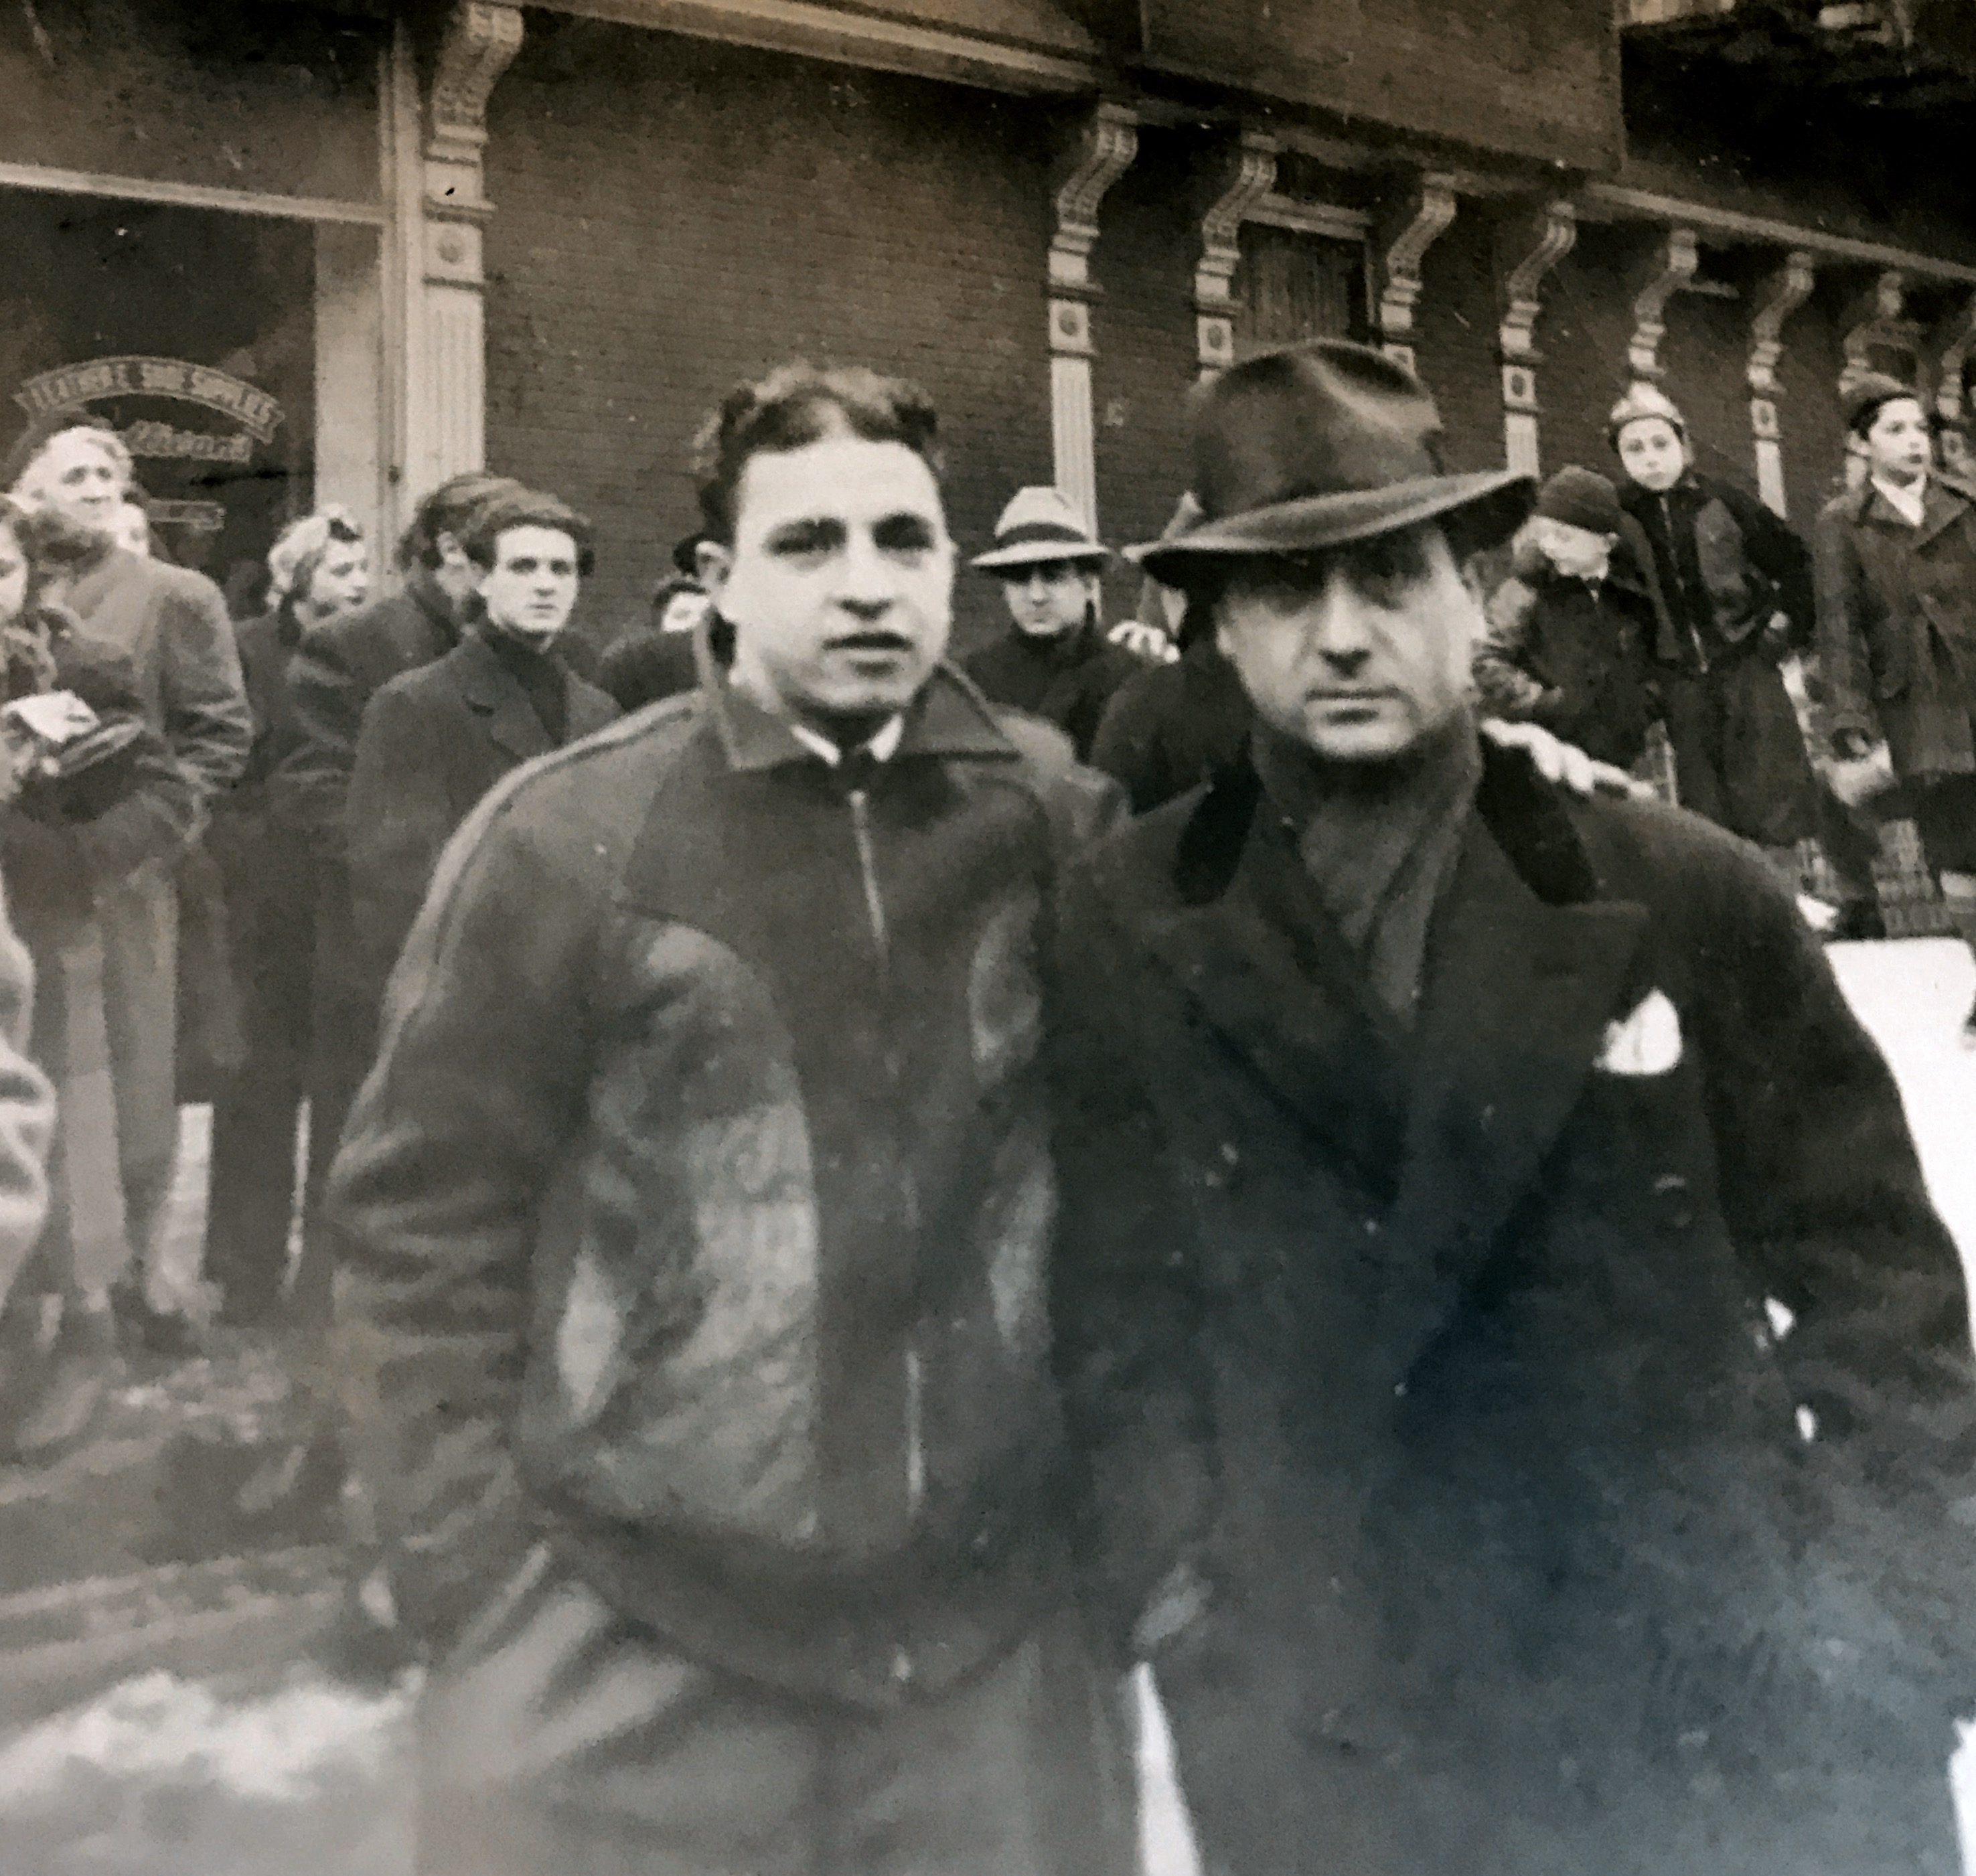 Just before going to reception center Sat Jan 30 1943 Frank Carbone enlisted in Army he is with his Dad Constantino and he is the eldest boy and first to serve but all 6 served